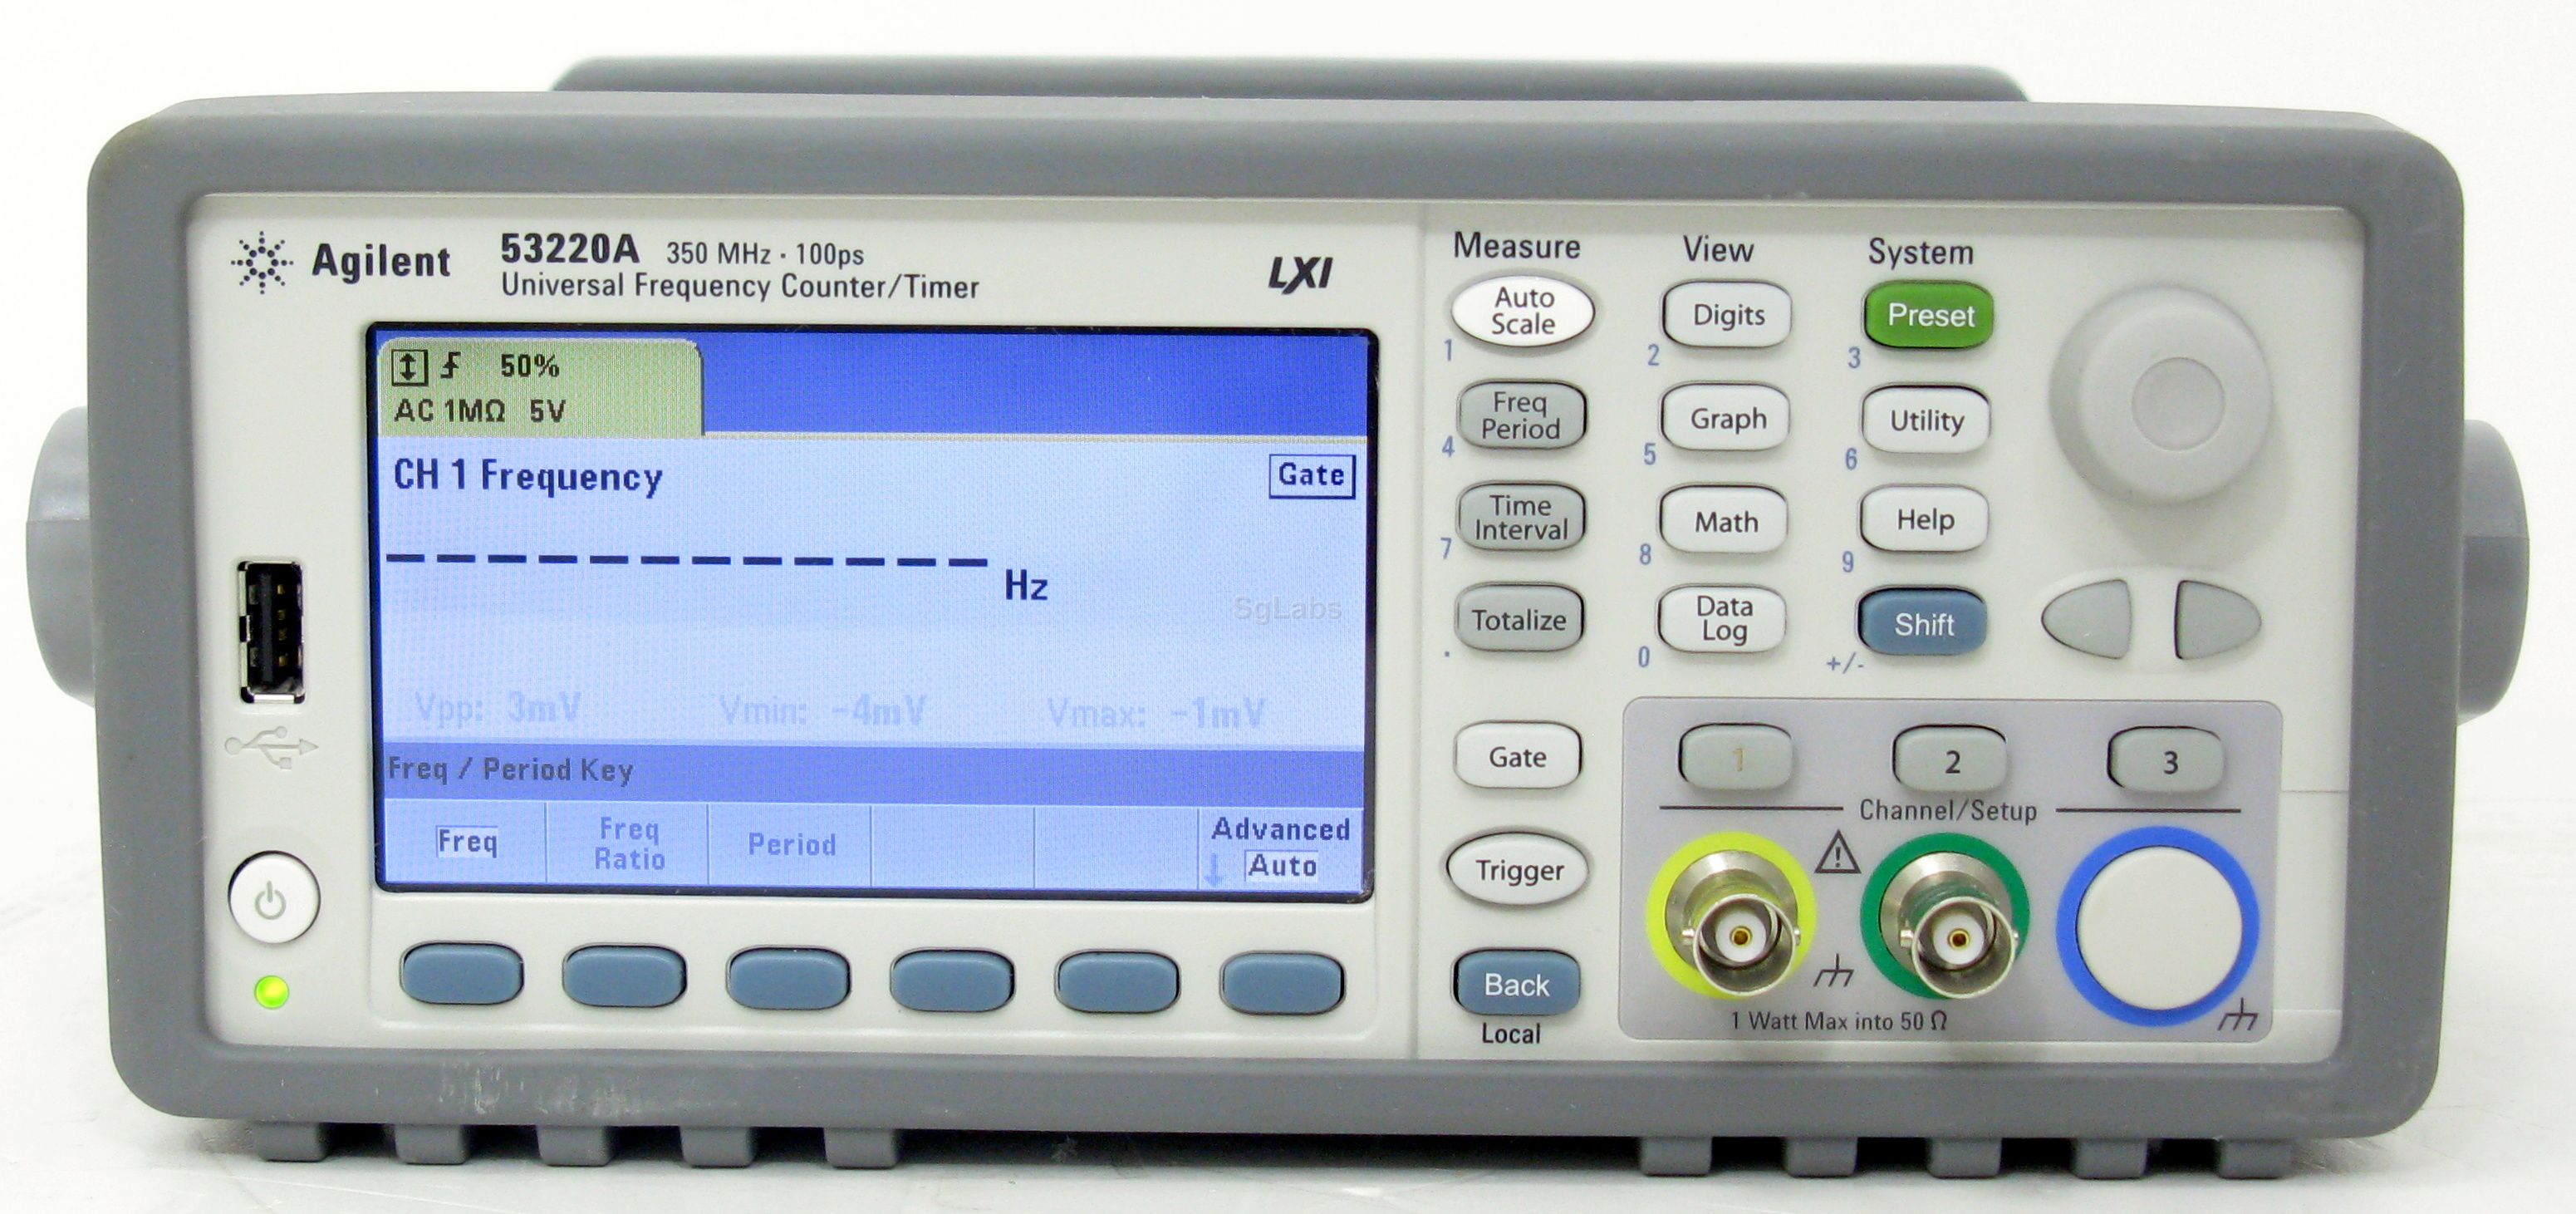 100 ps KEYSIGHT 53220A 350 MHz Universal Frequency Counter/Timer 12 Digits/s 